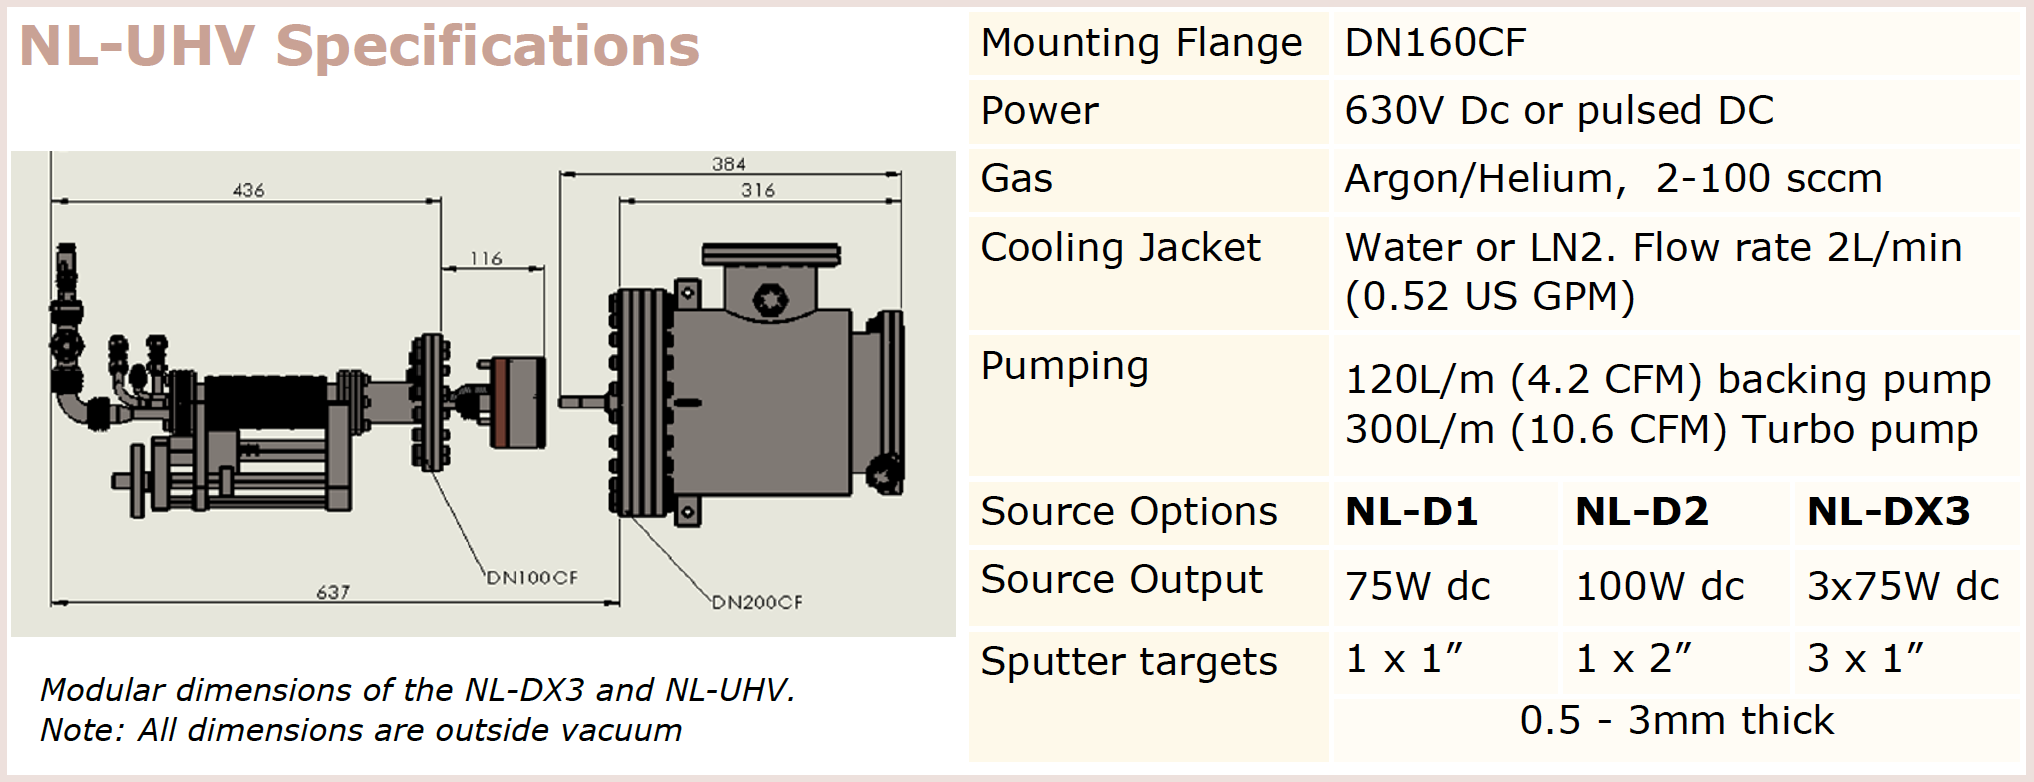 nl-uhv specifications